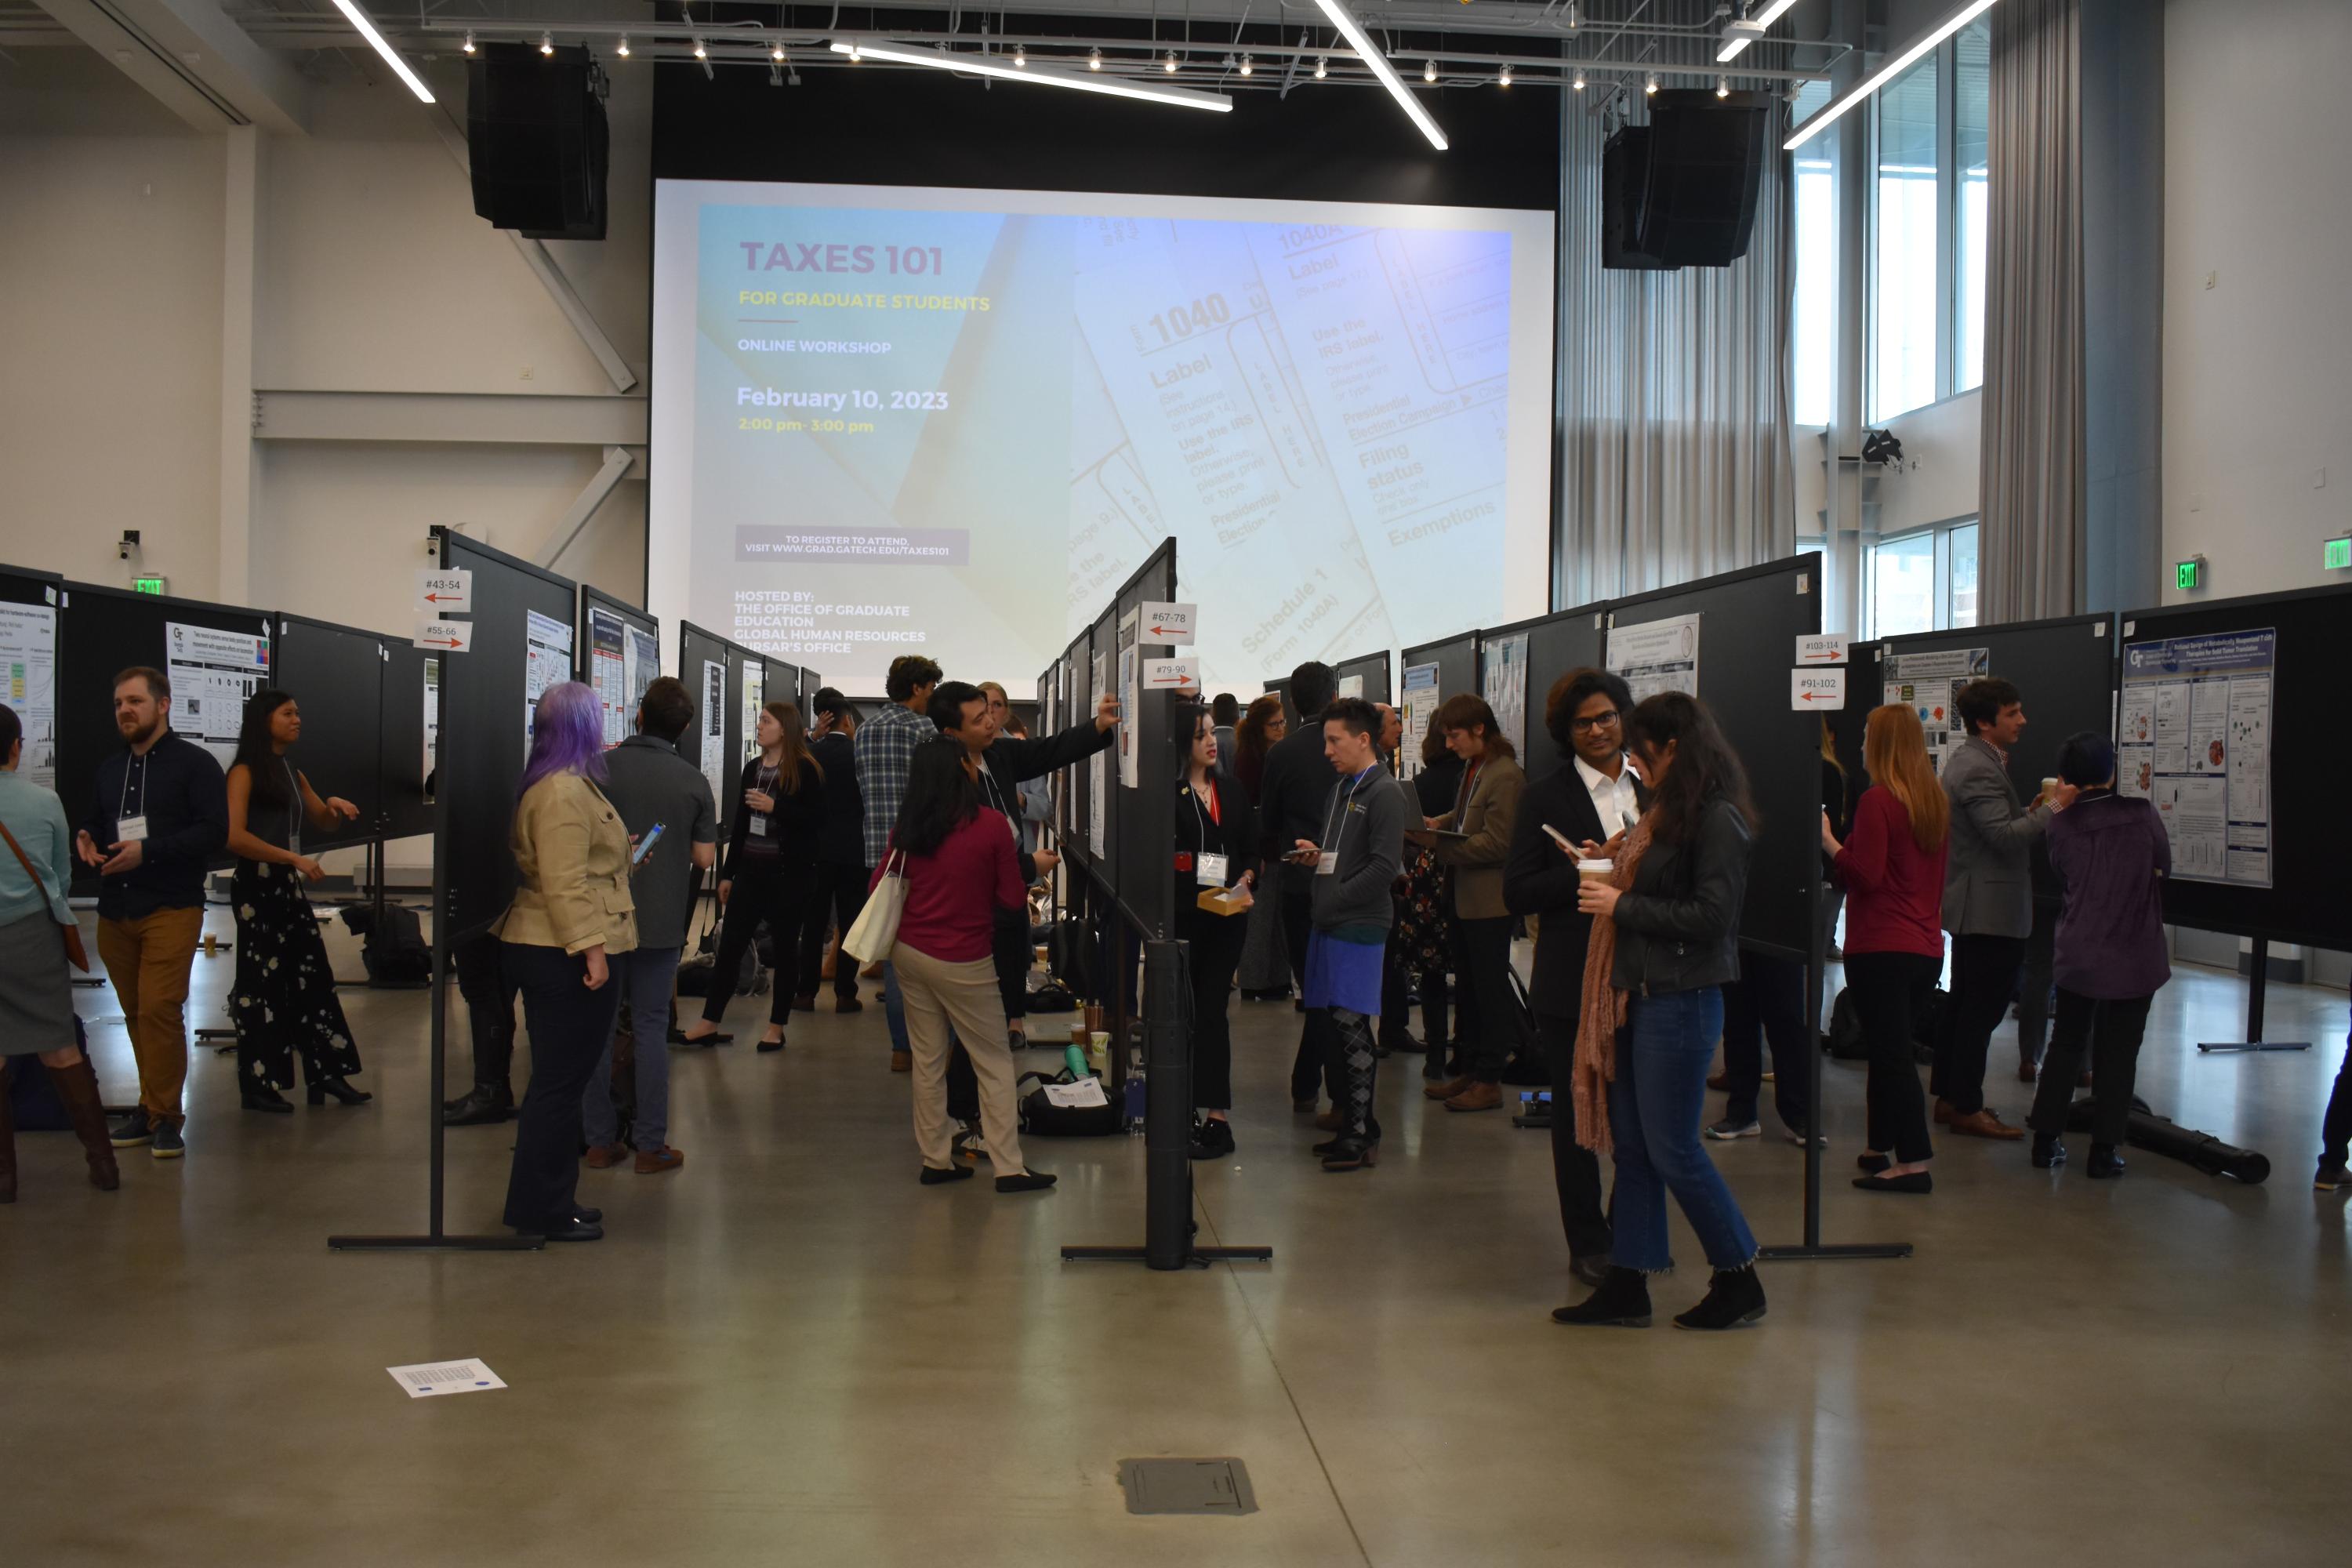 Photo taken by Brittani Hill on February 1, 2023, in the Exhibition Hall during the 2023 CRIDC Poster Competition